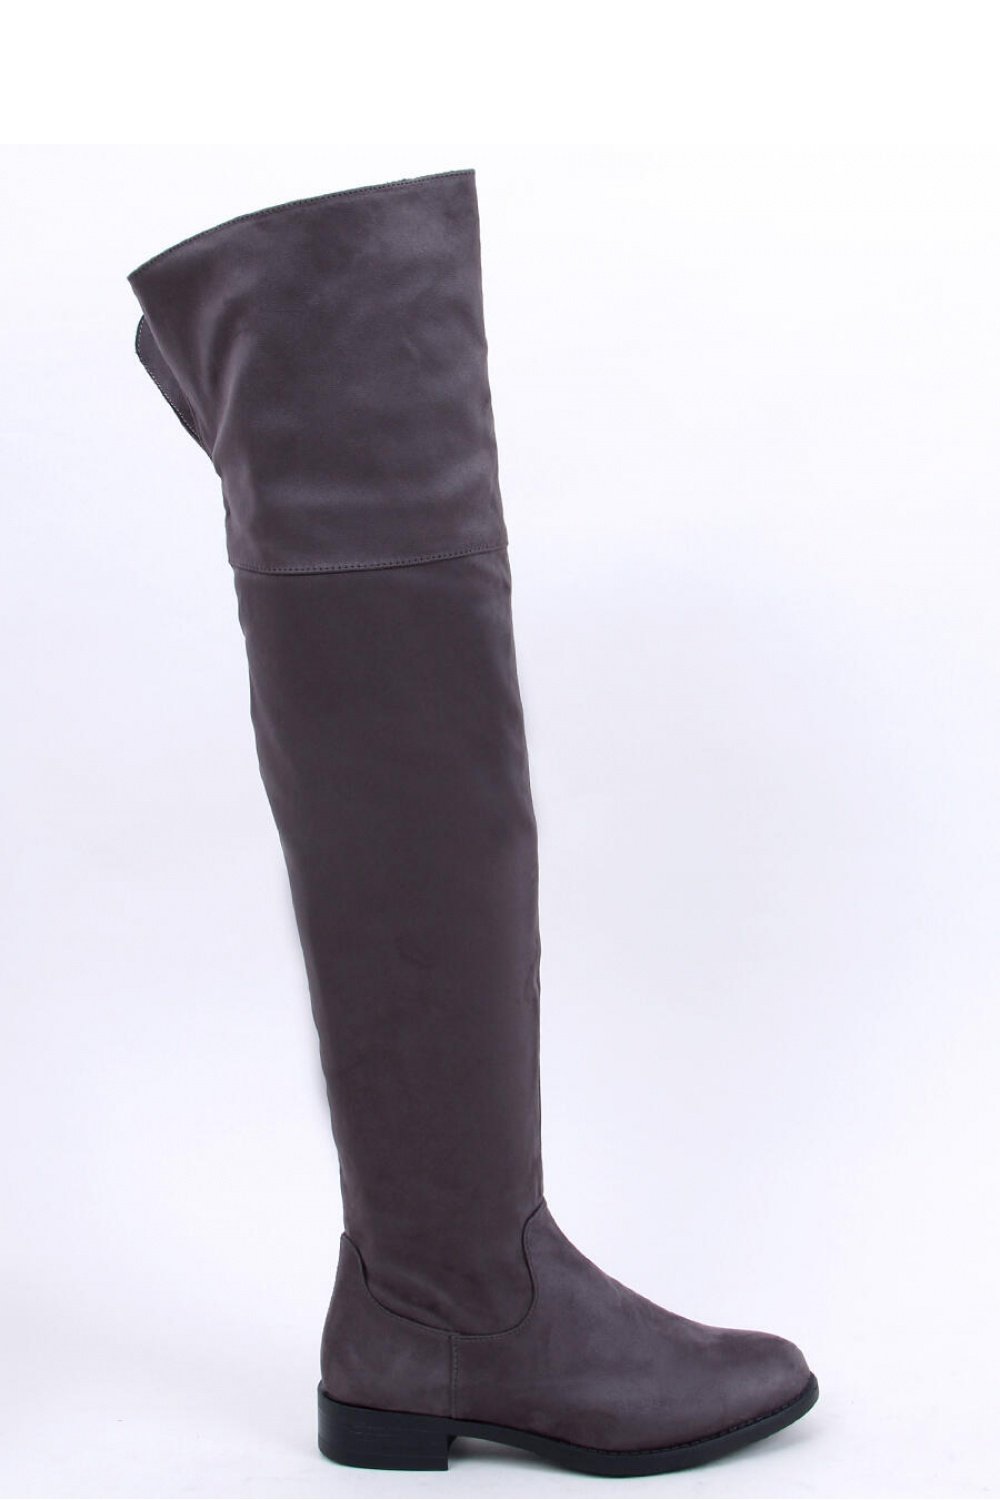 Officer boots model 174077 Inello Posh Styles Apparel